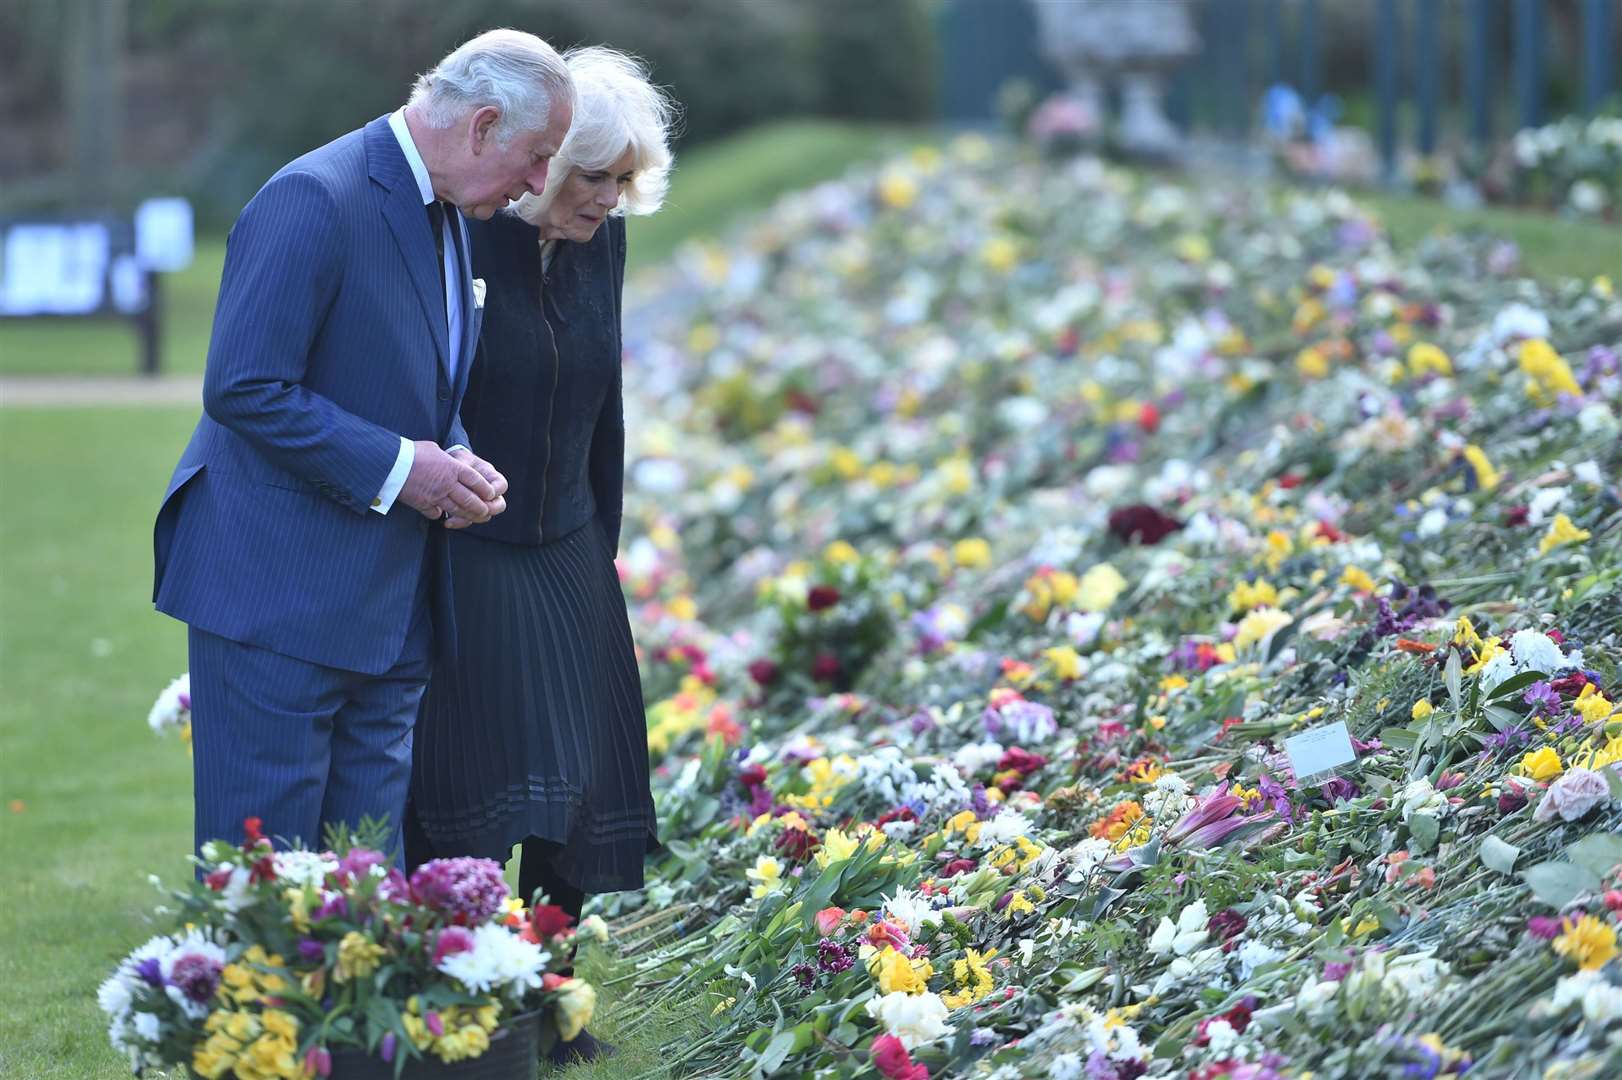 The Prince of Wales and the Duchess of Cornwall visit the gardens of Marlborough House to view the flowers and messages left by members of the public (Jeremy Selwyn/Evening Standard/PA)